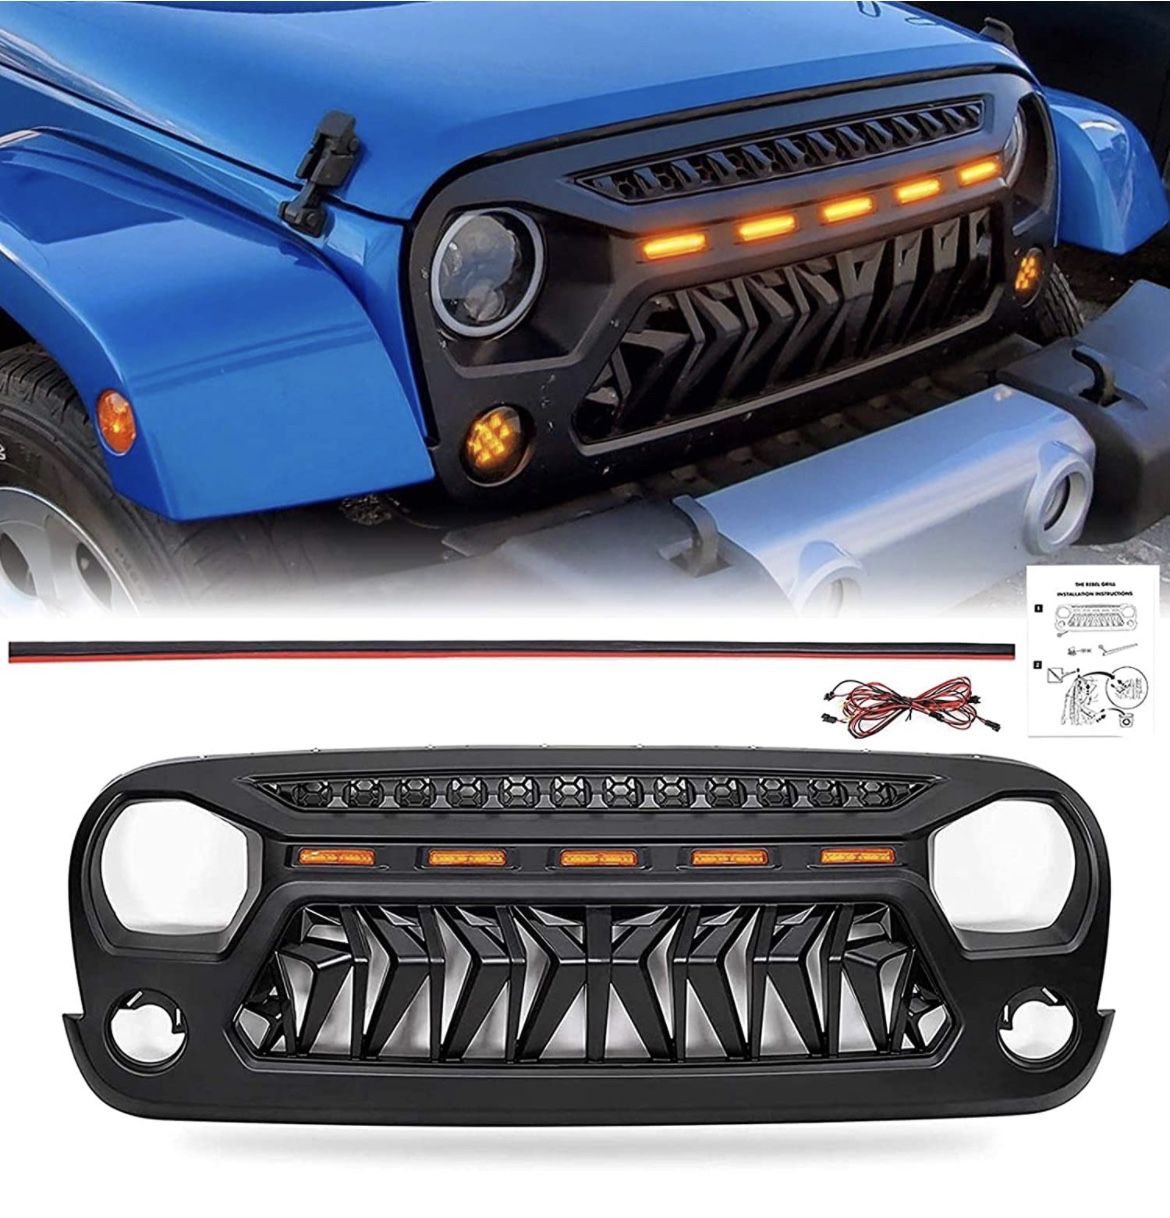 Haitzu Shark Grill Fit for Jeep Wrangler 2007-2018 JK Accessories, Matte  Black Grille with 5 Amber Lights Including JKU Unlimited Rubicon Sahara  Sport for Sale in Chino, CA - OfferUp